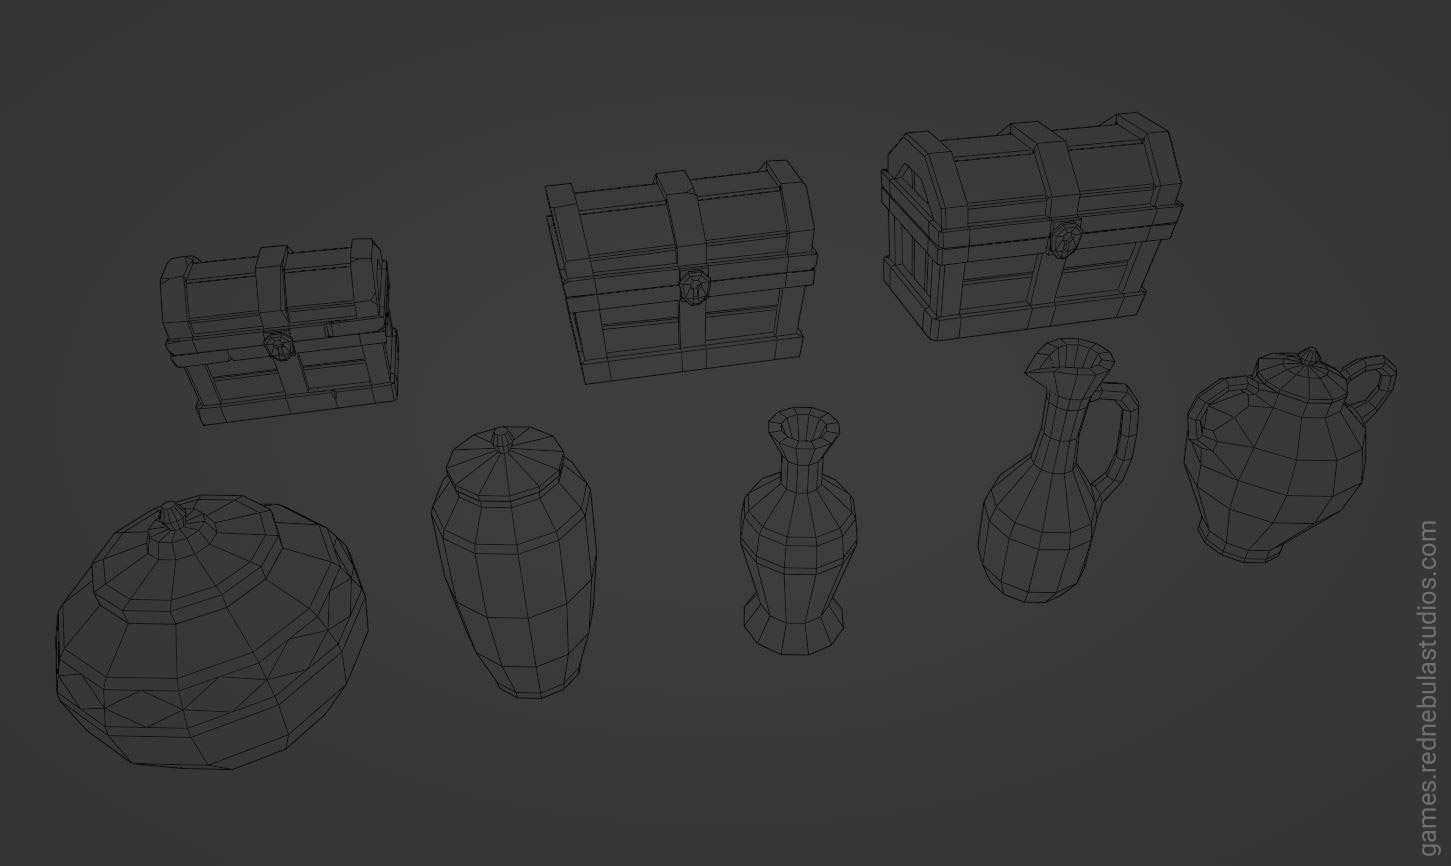 The same set of treasure chests and pots from the last screenshot, but shown in wireframe mode.